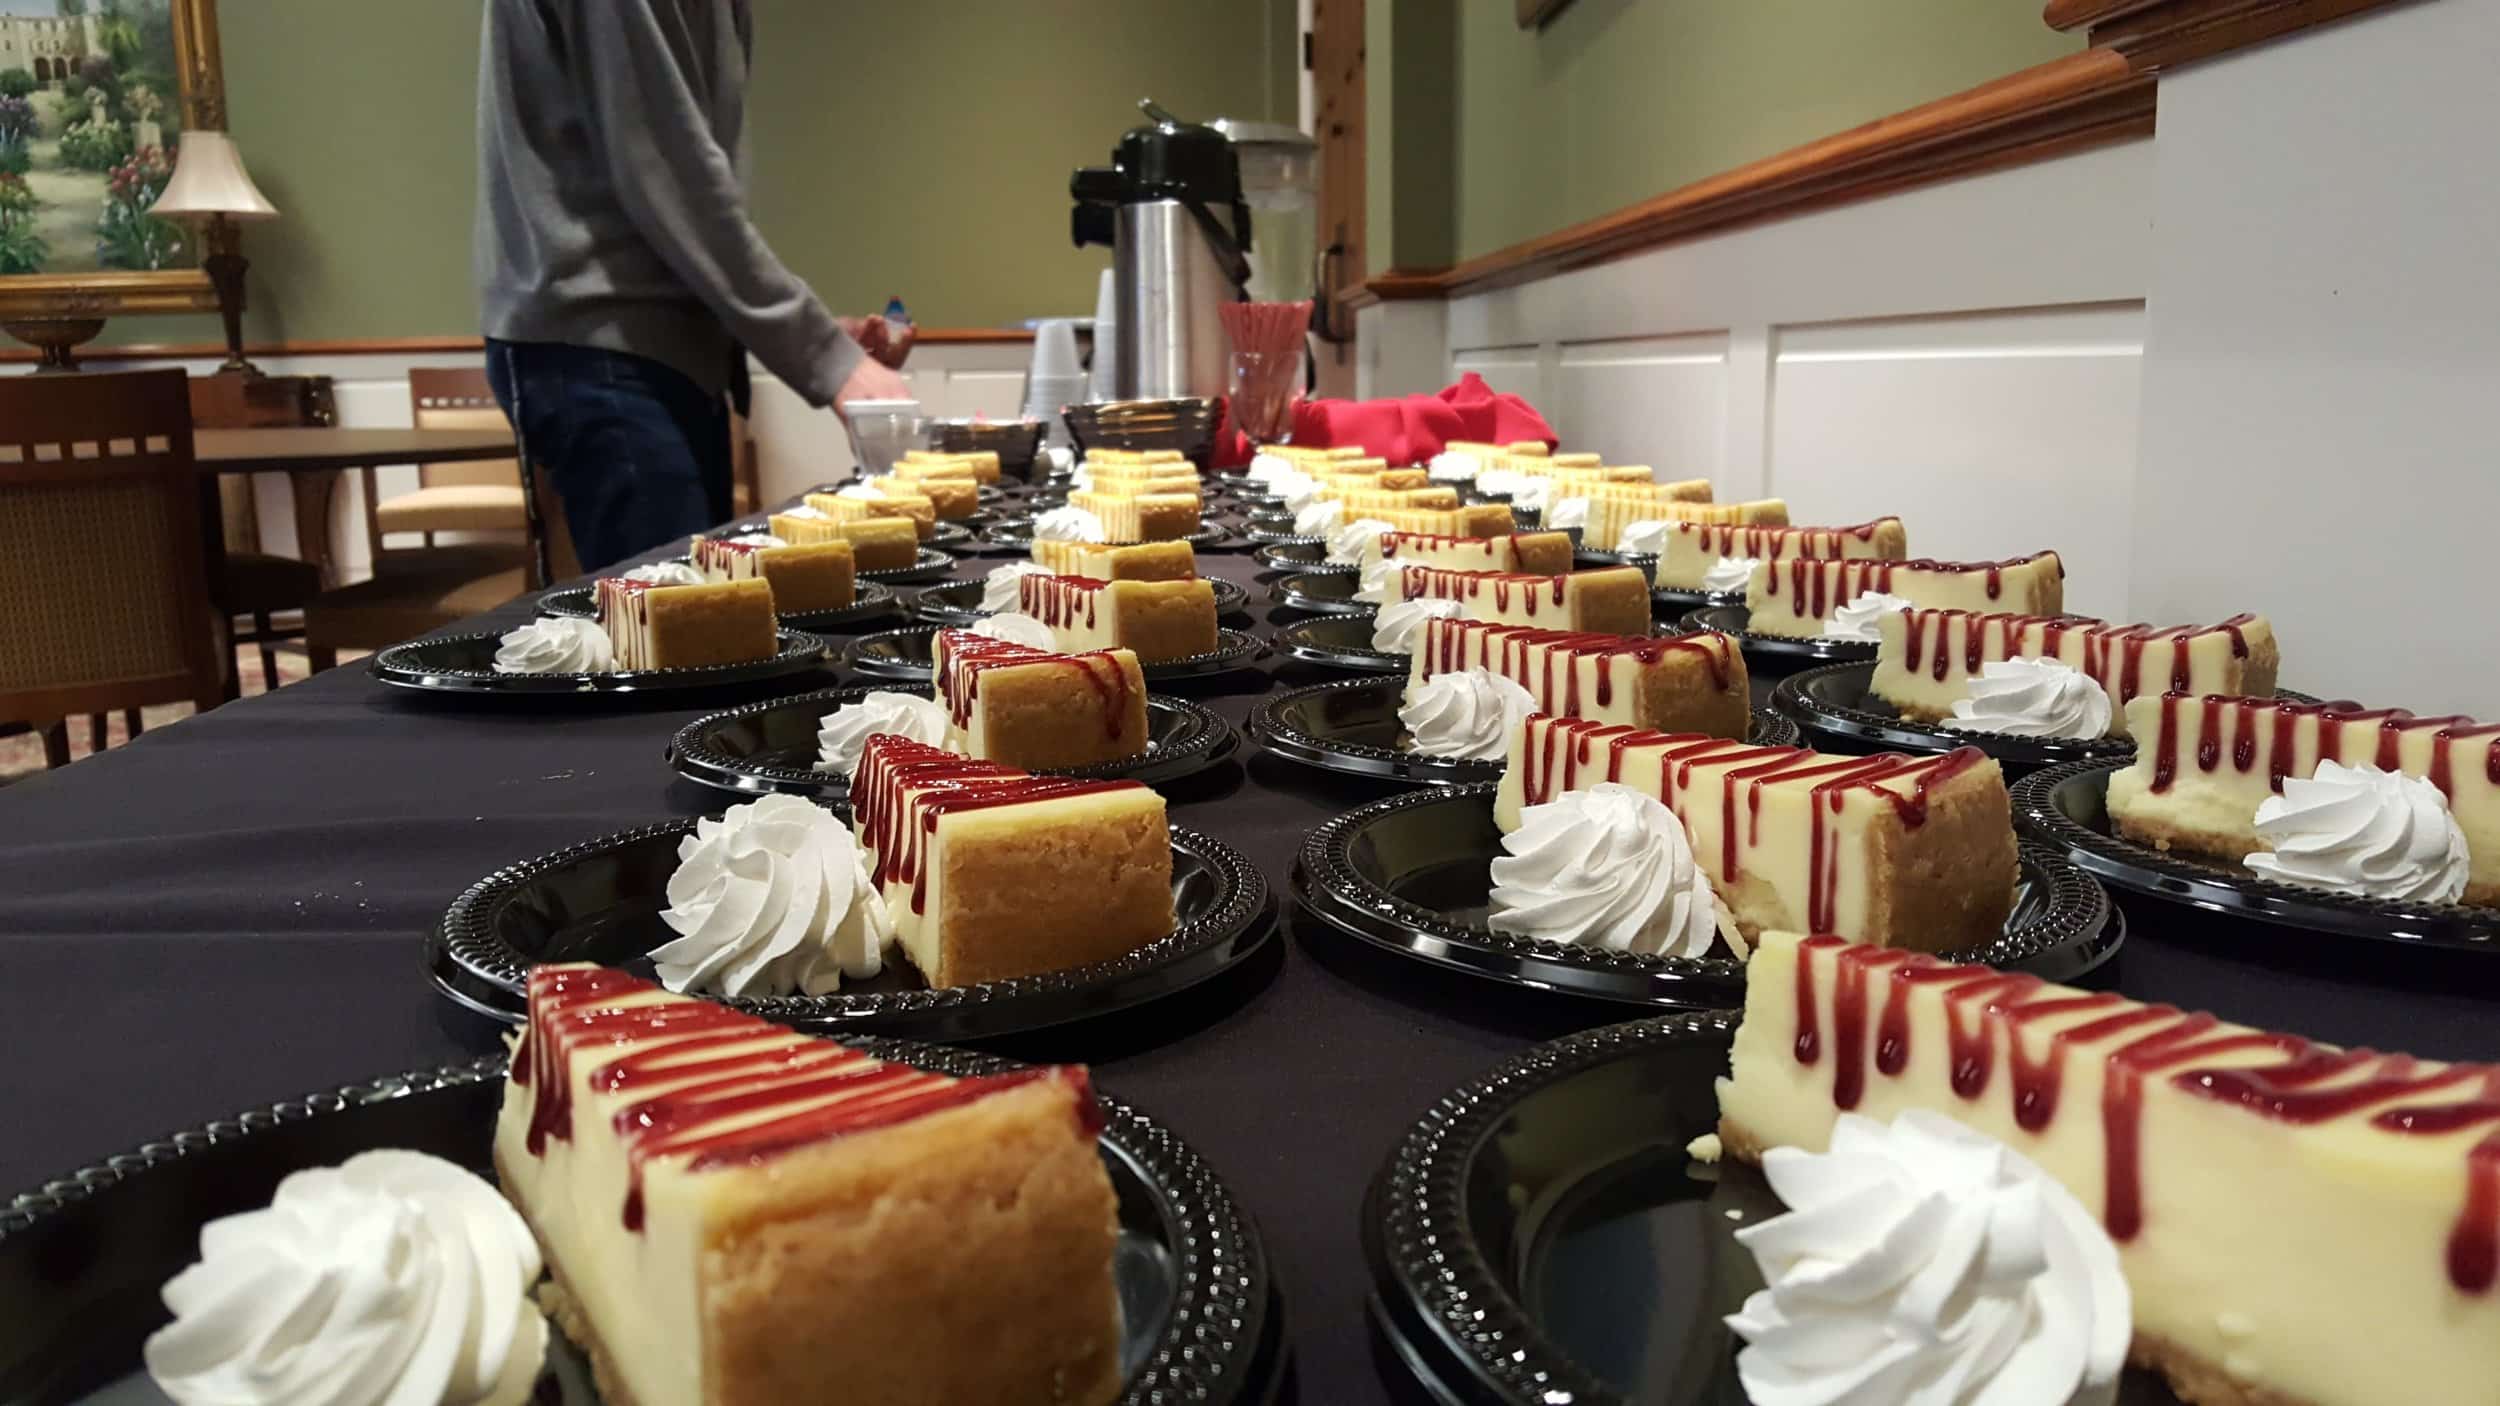 This semester, coffee and desserts were offered for students who attended the event.&nbsp;